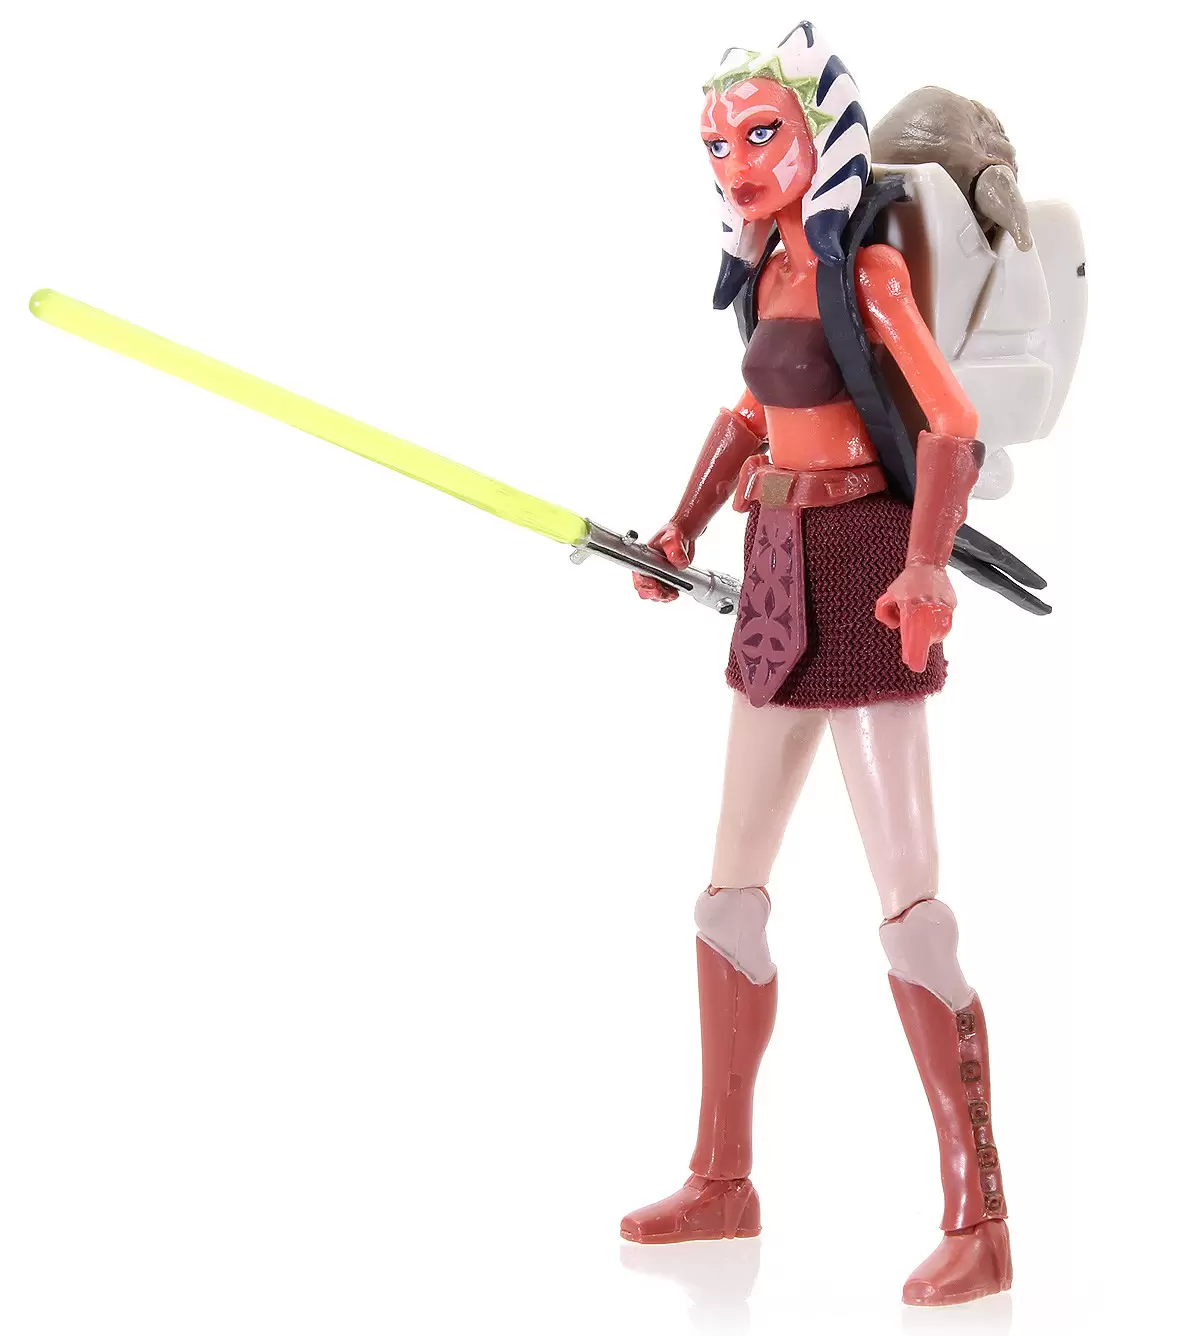 The Clone Wars - Shadow of the Dark Side - Ahsoka TANO includes Rotta The Huttlet!